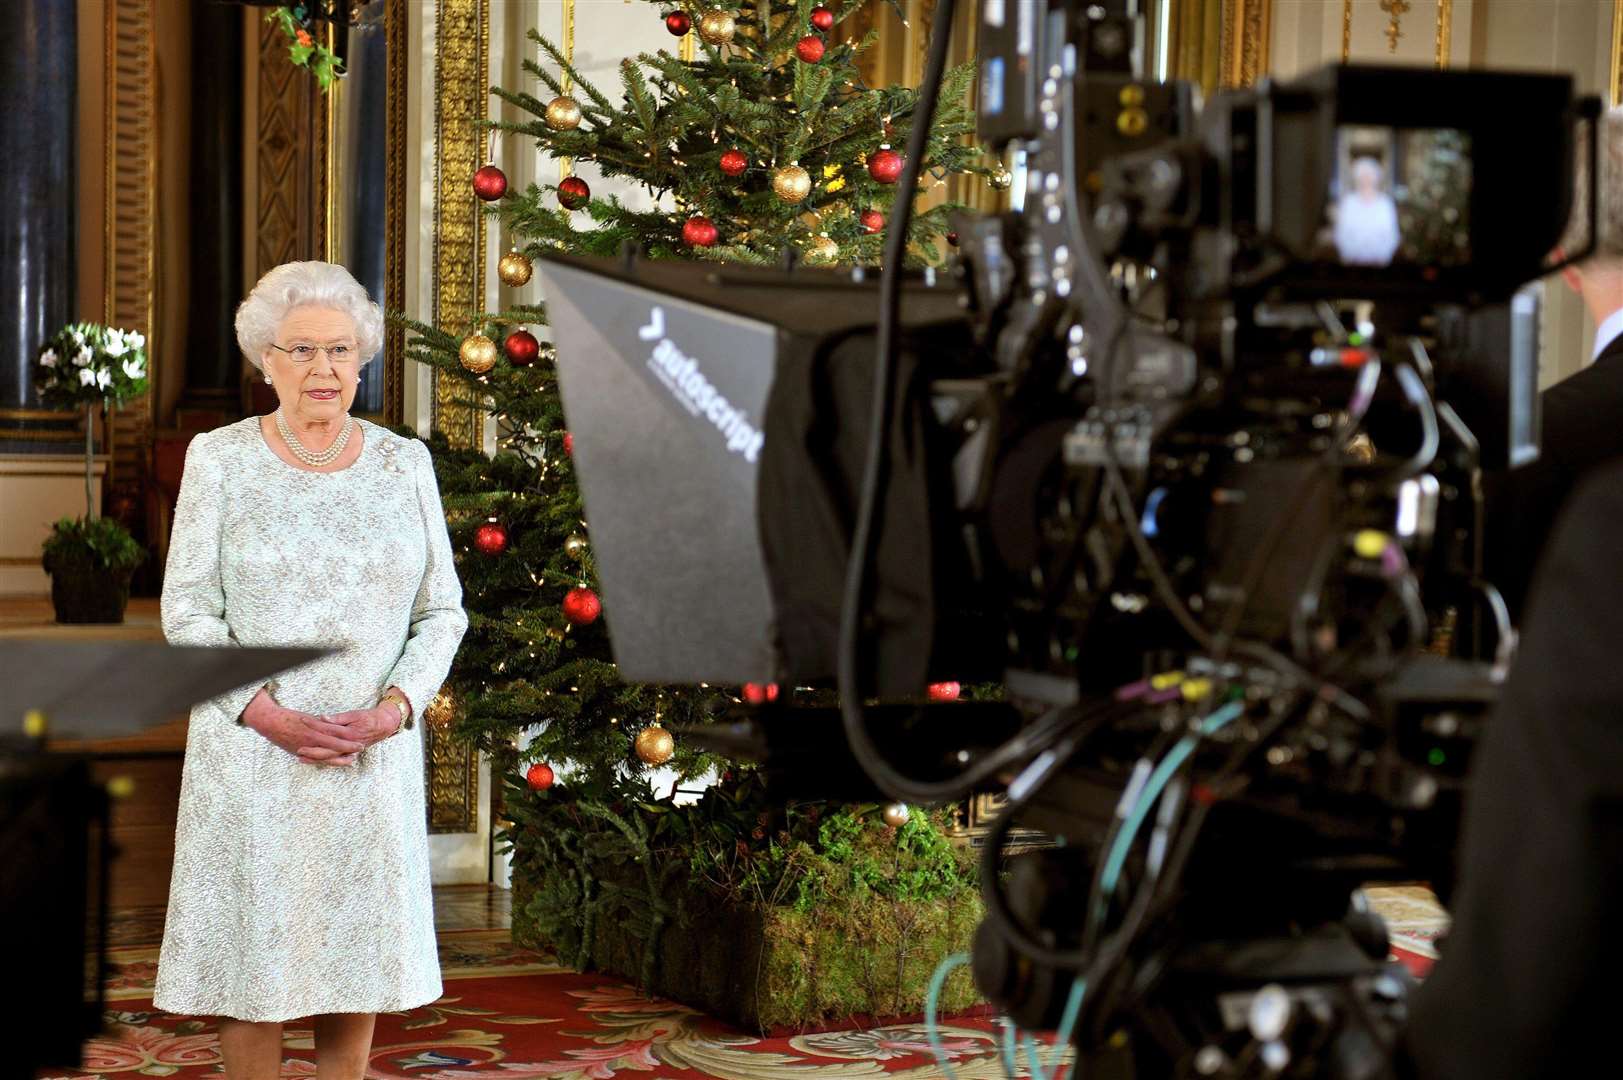 The Queen recording Christmas message to the Commonwealth in 2012 (John Stillwell/PA)